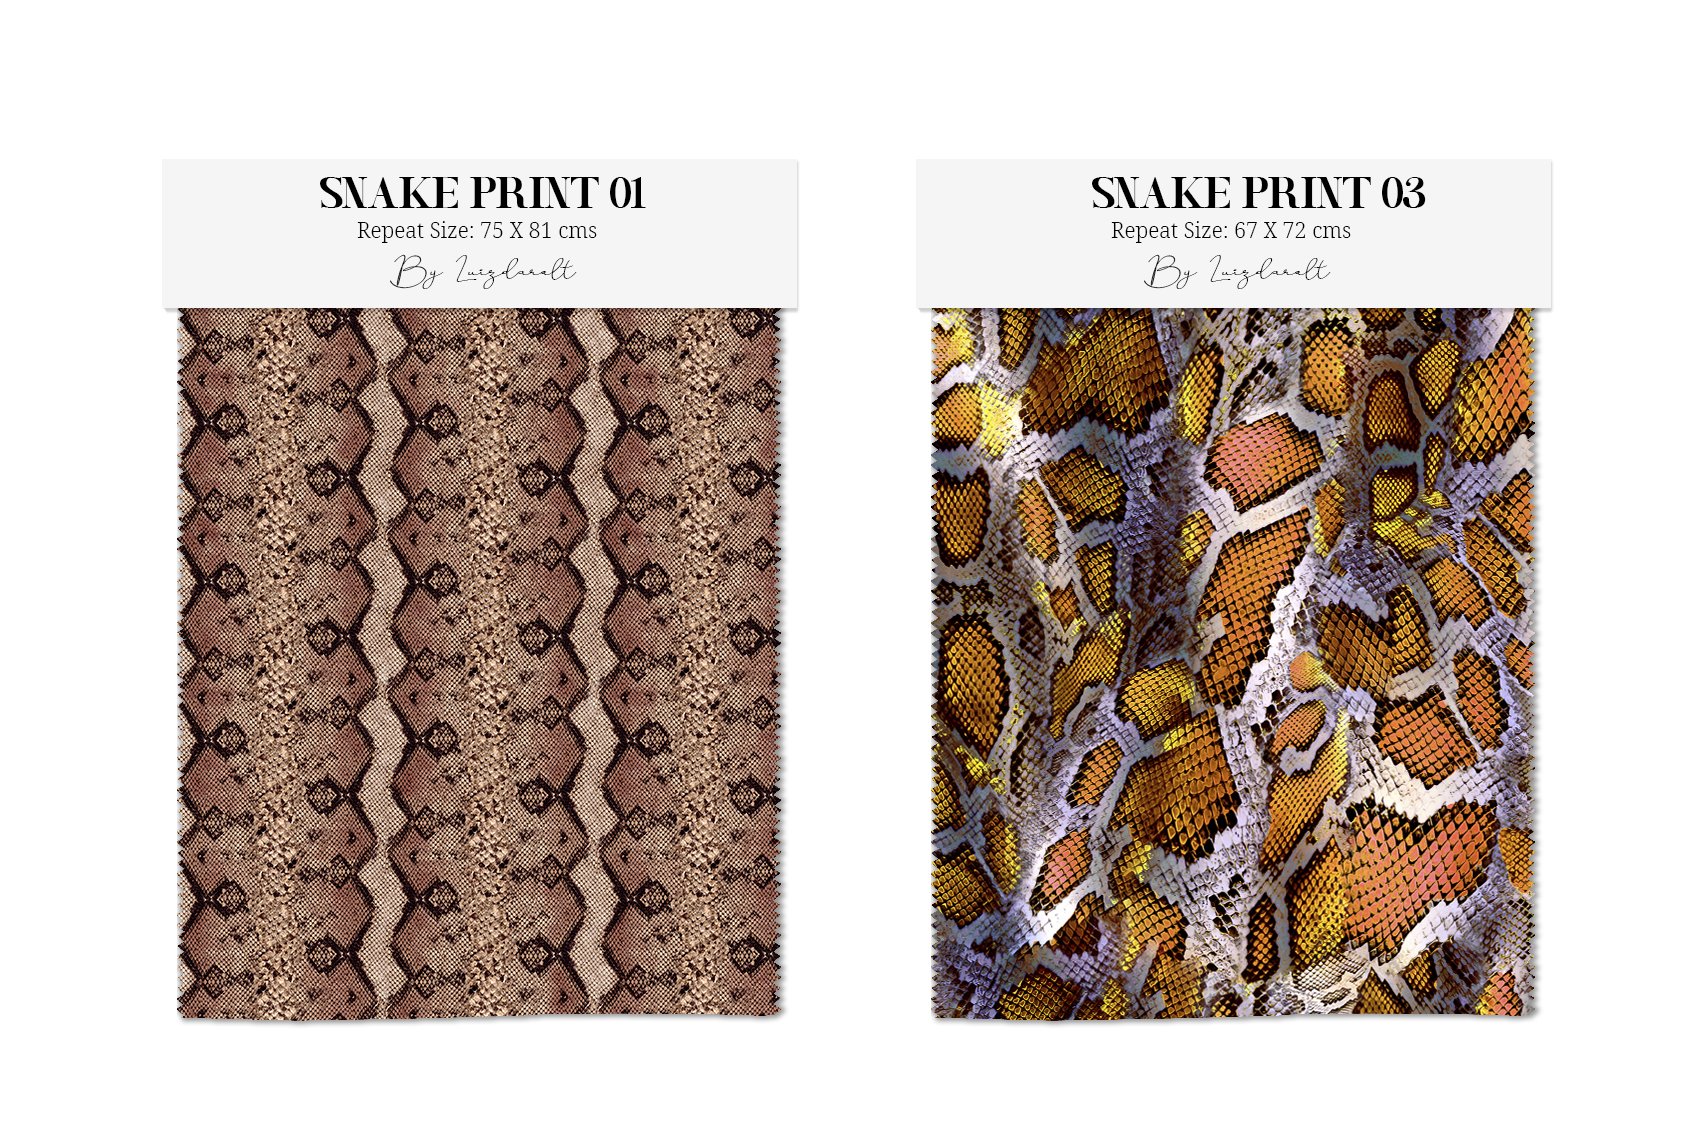 Two options of snake prints.